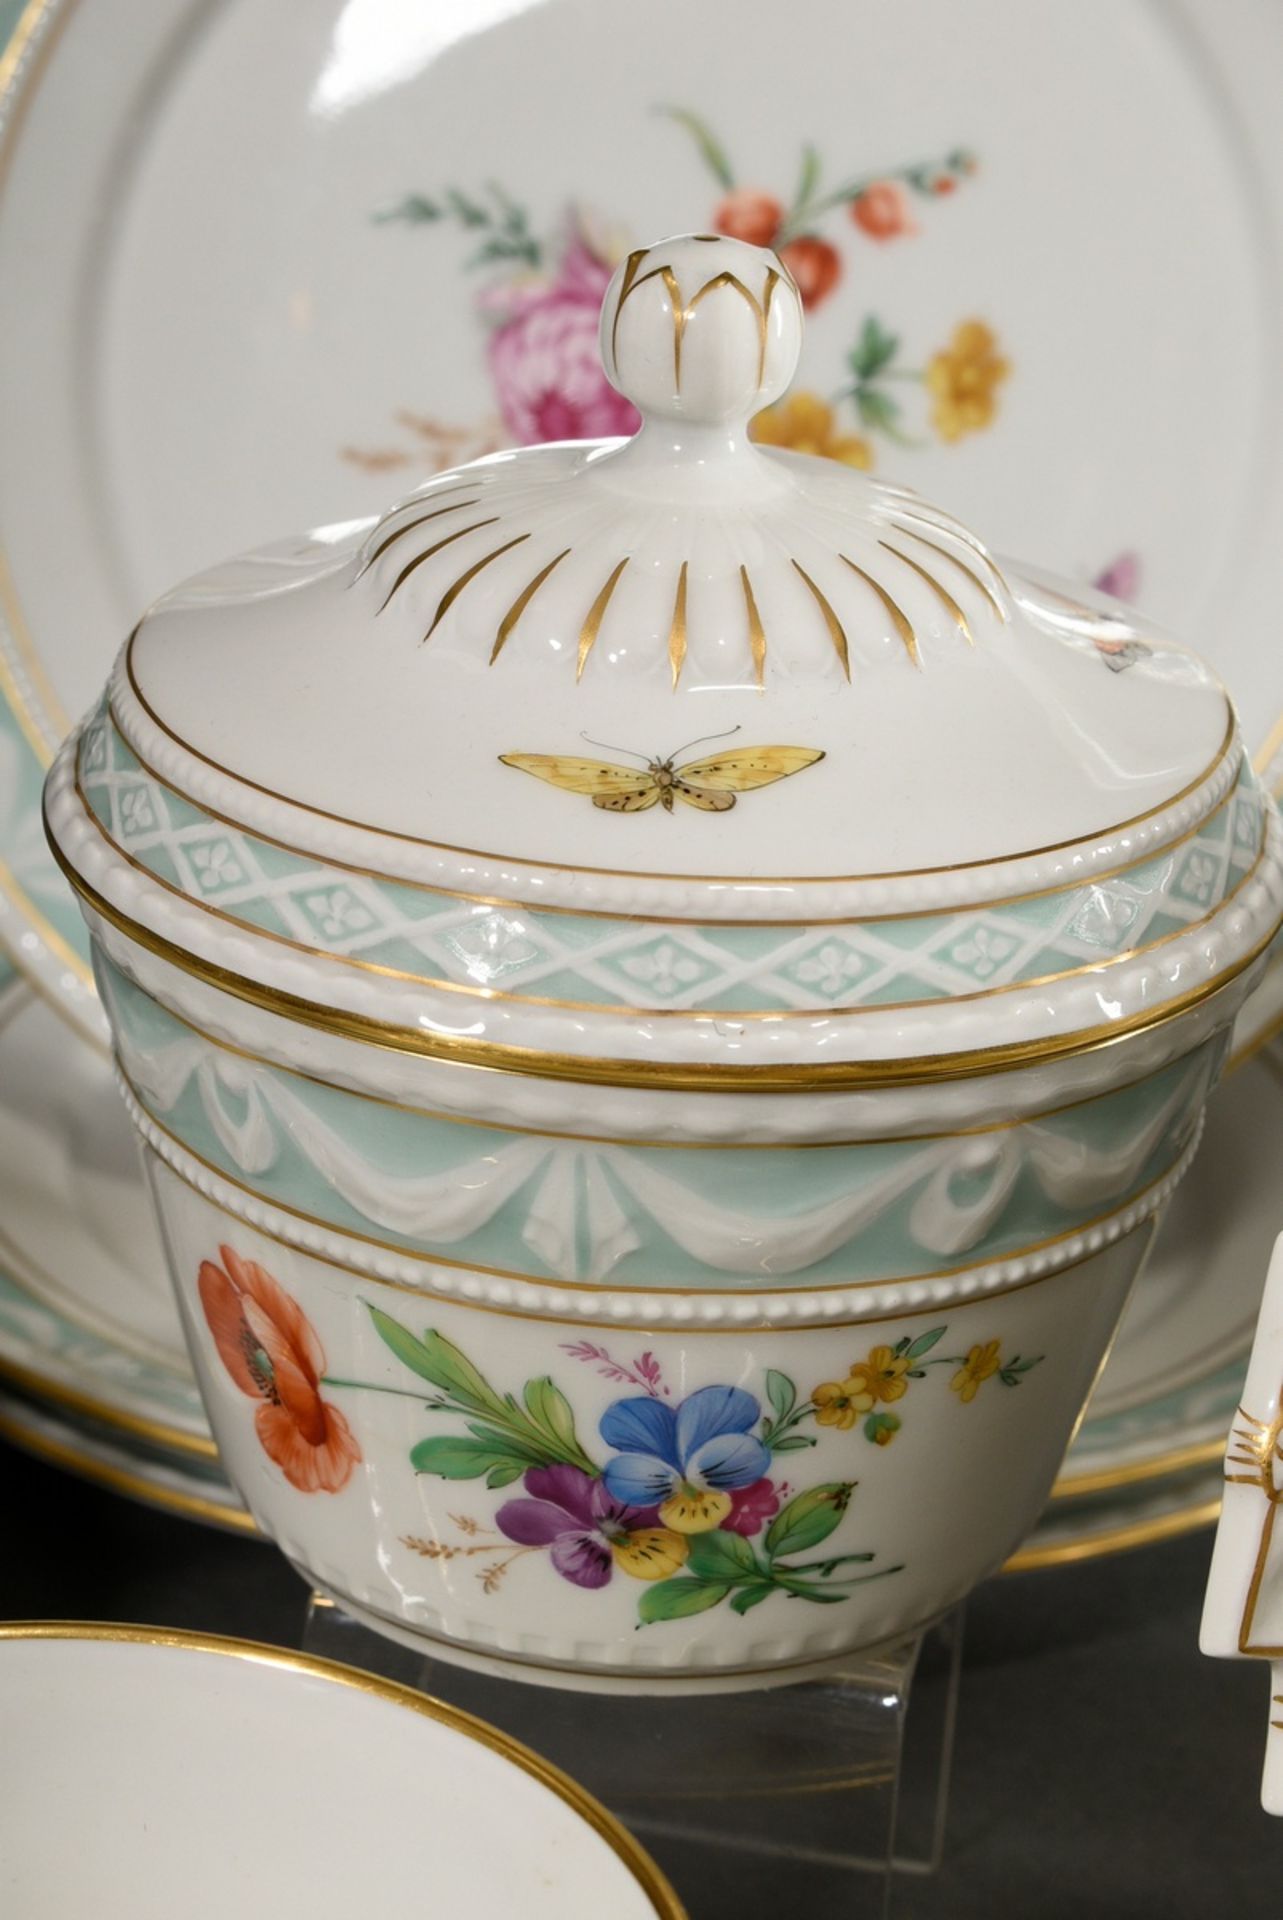 15 Pieces KPM coffee service "Kurland" with flowers and insects, gold staffage and turquoise frieze - Image 4 of 10